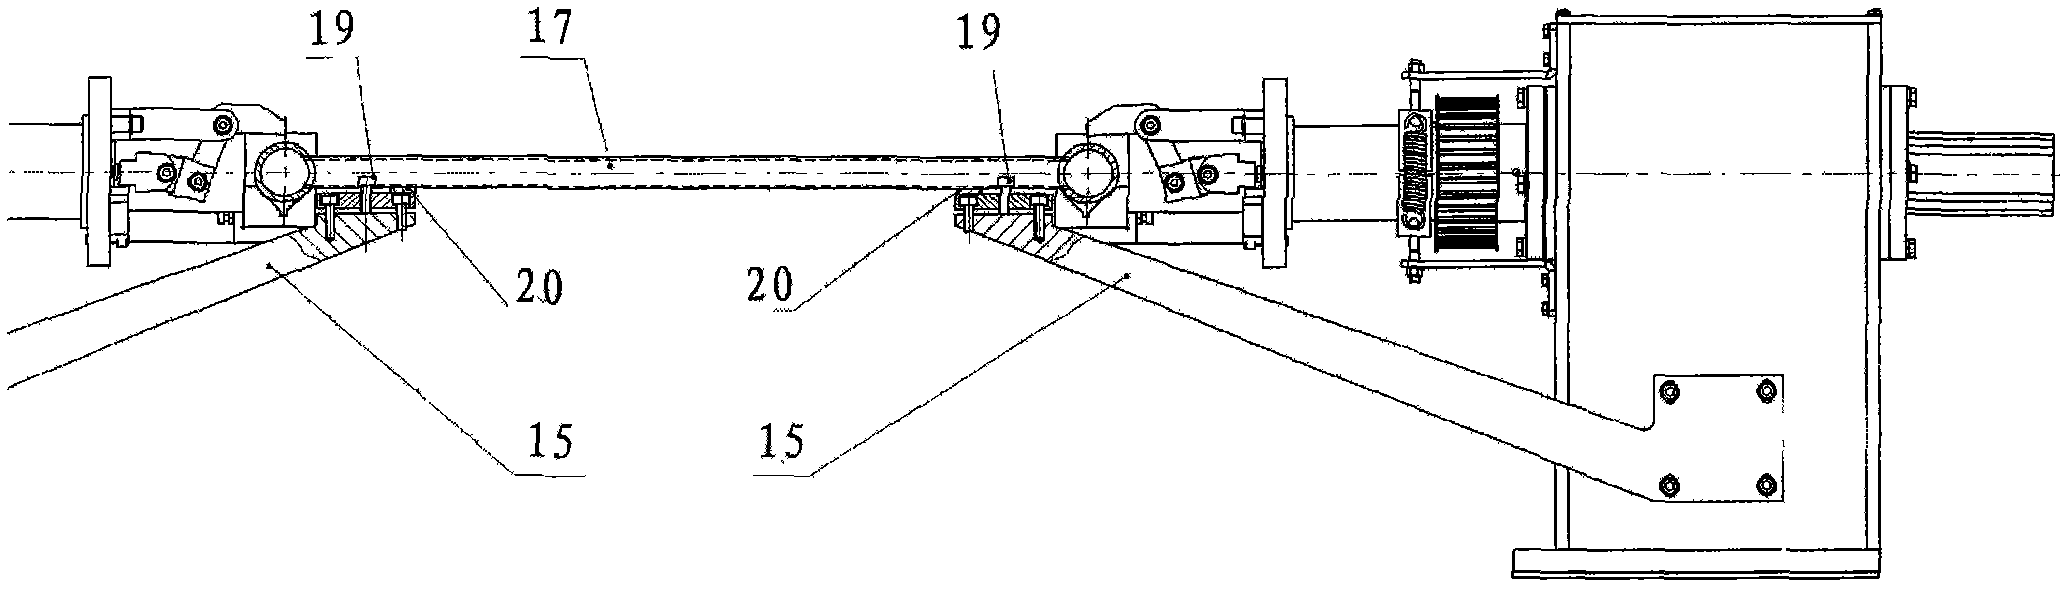 Intersecting line girth welding device